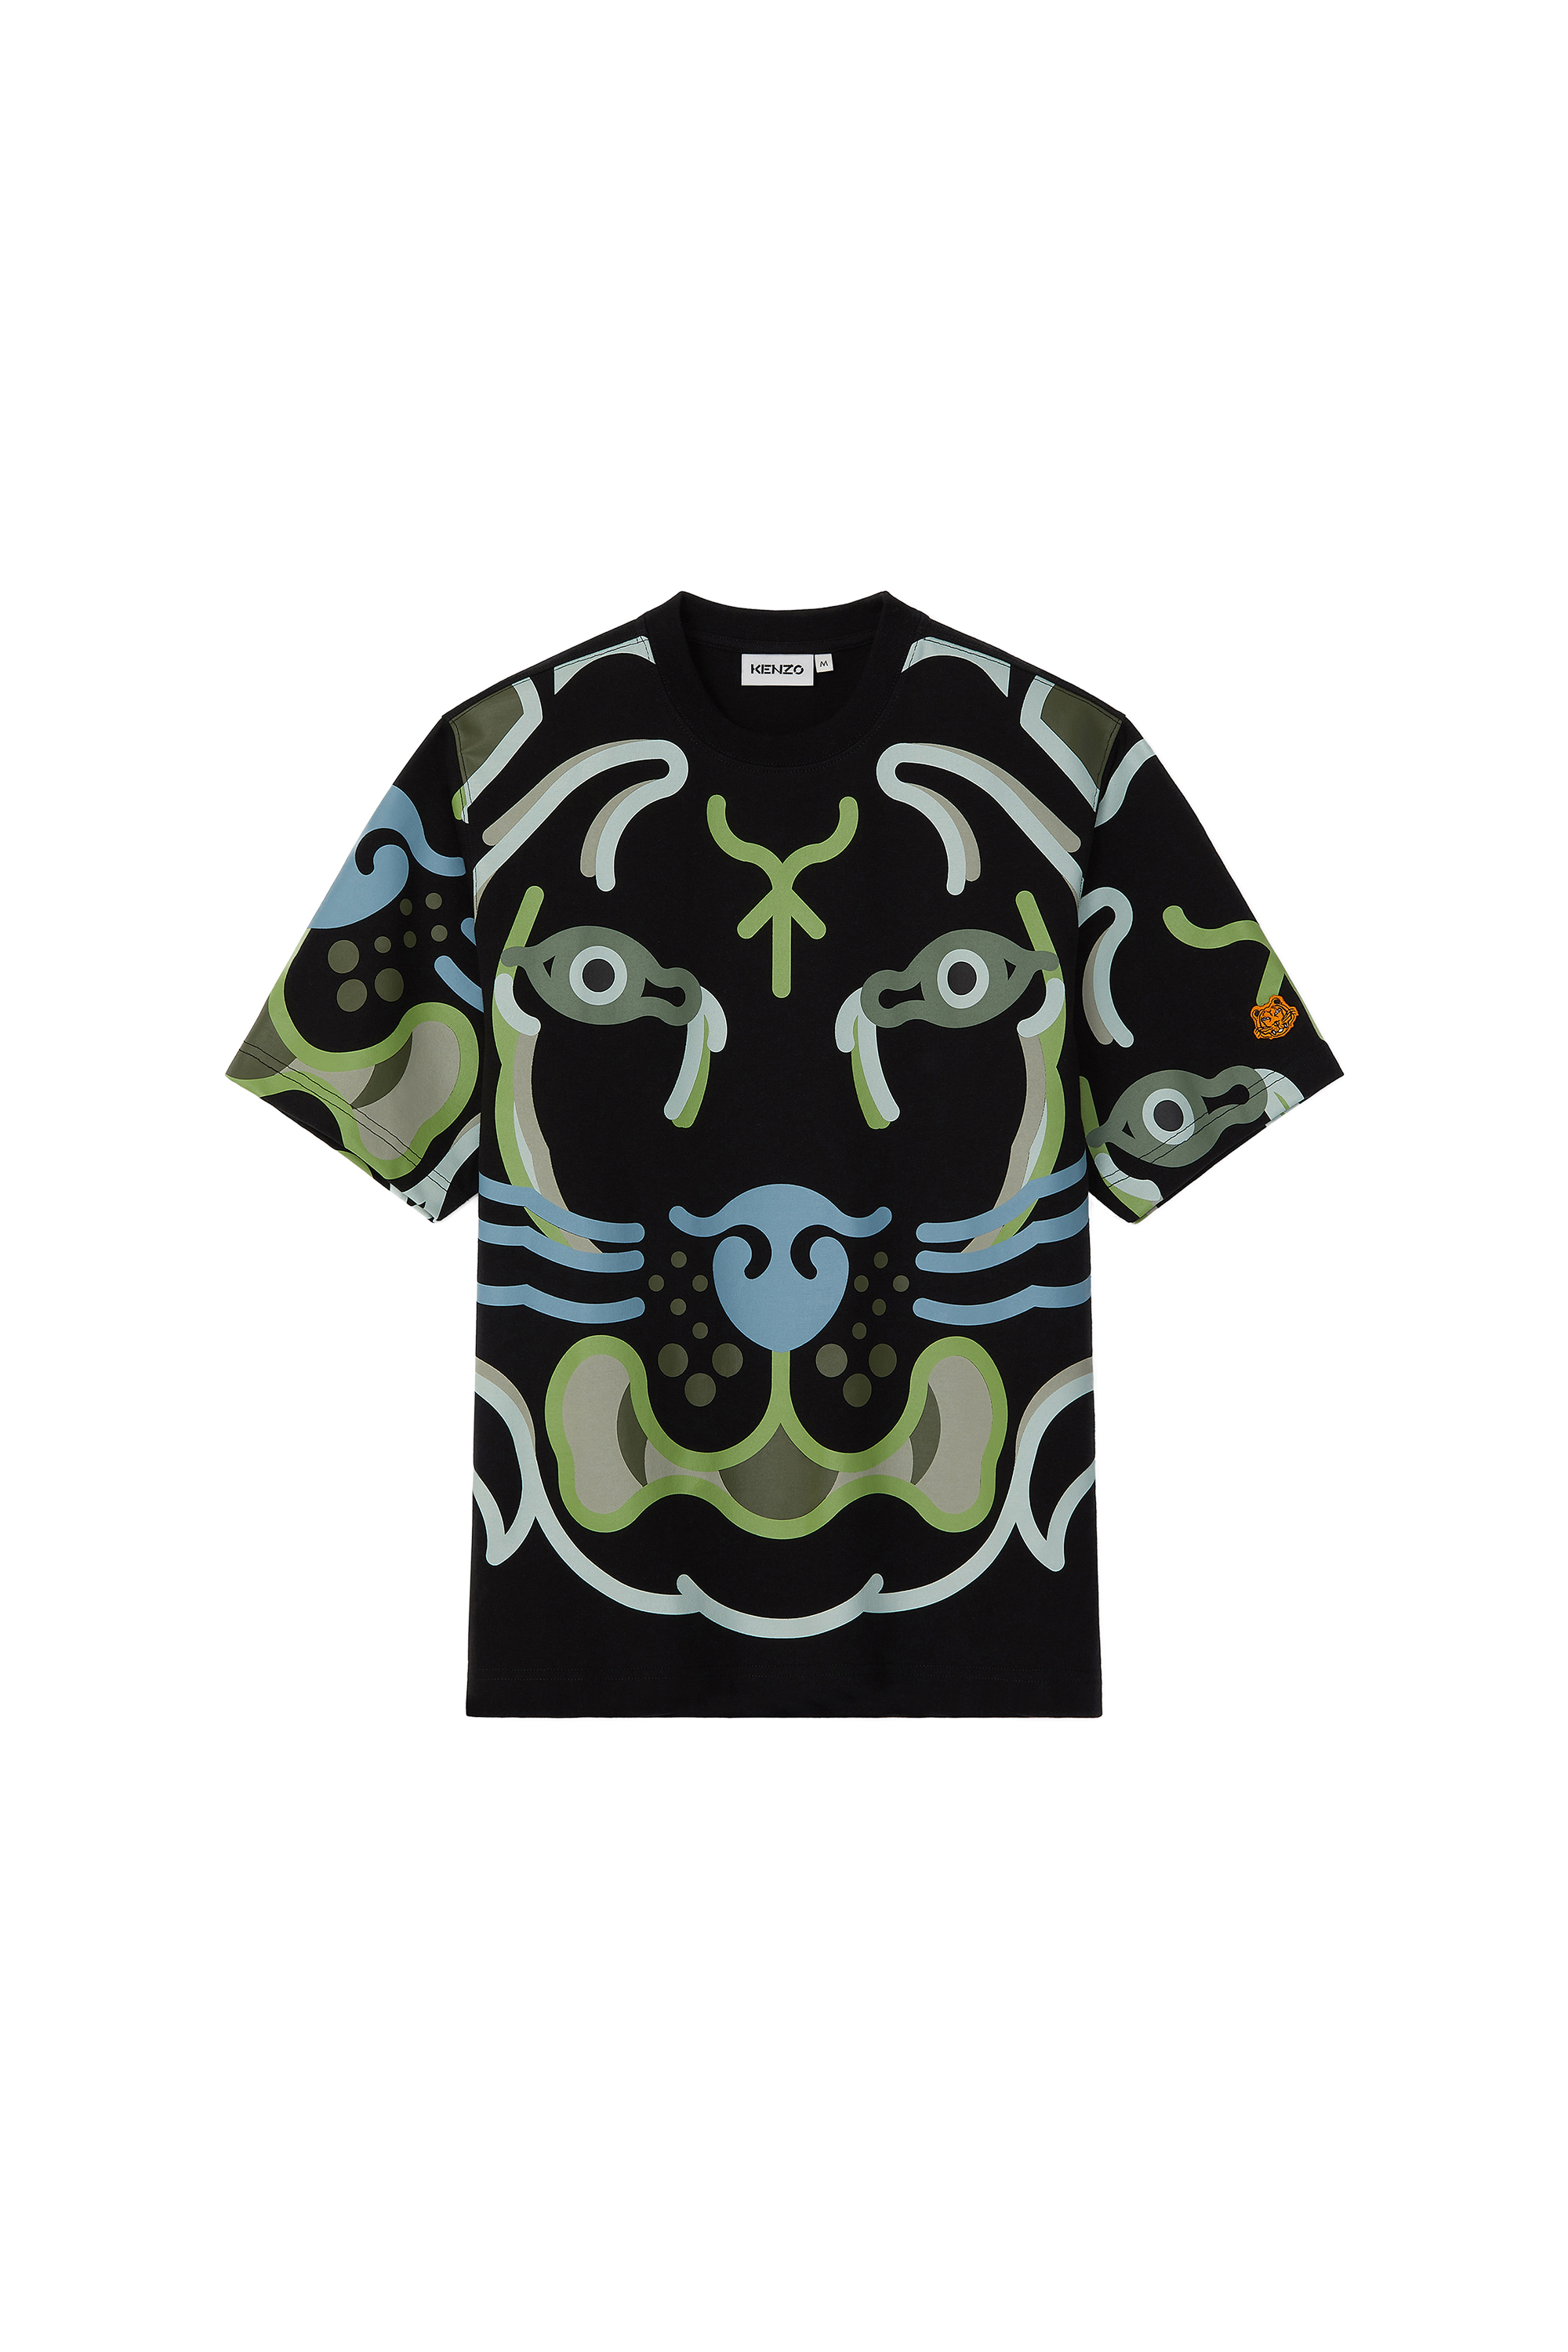 Kenzo re-teams with WWF to help save tigers | Esquire Middle East – Region's Best Men's Magazine